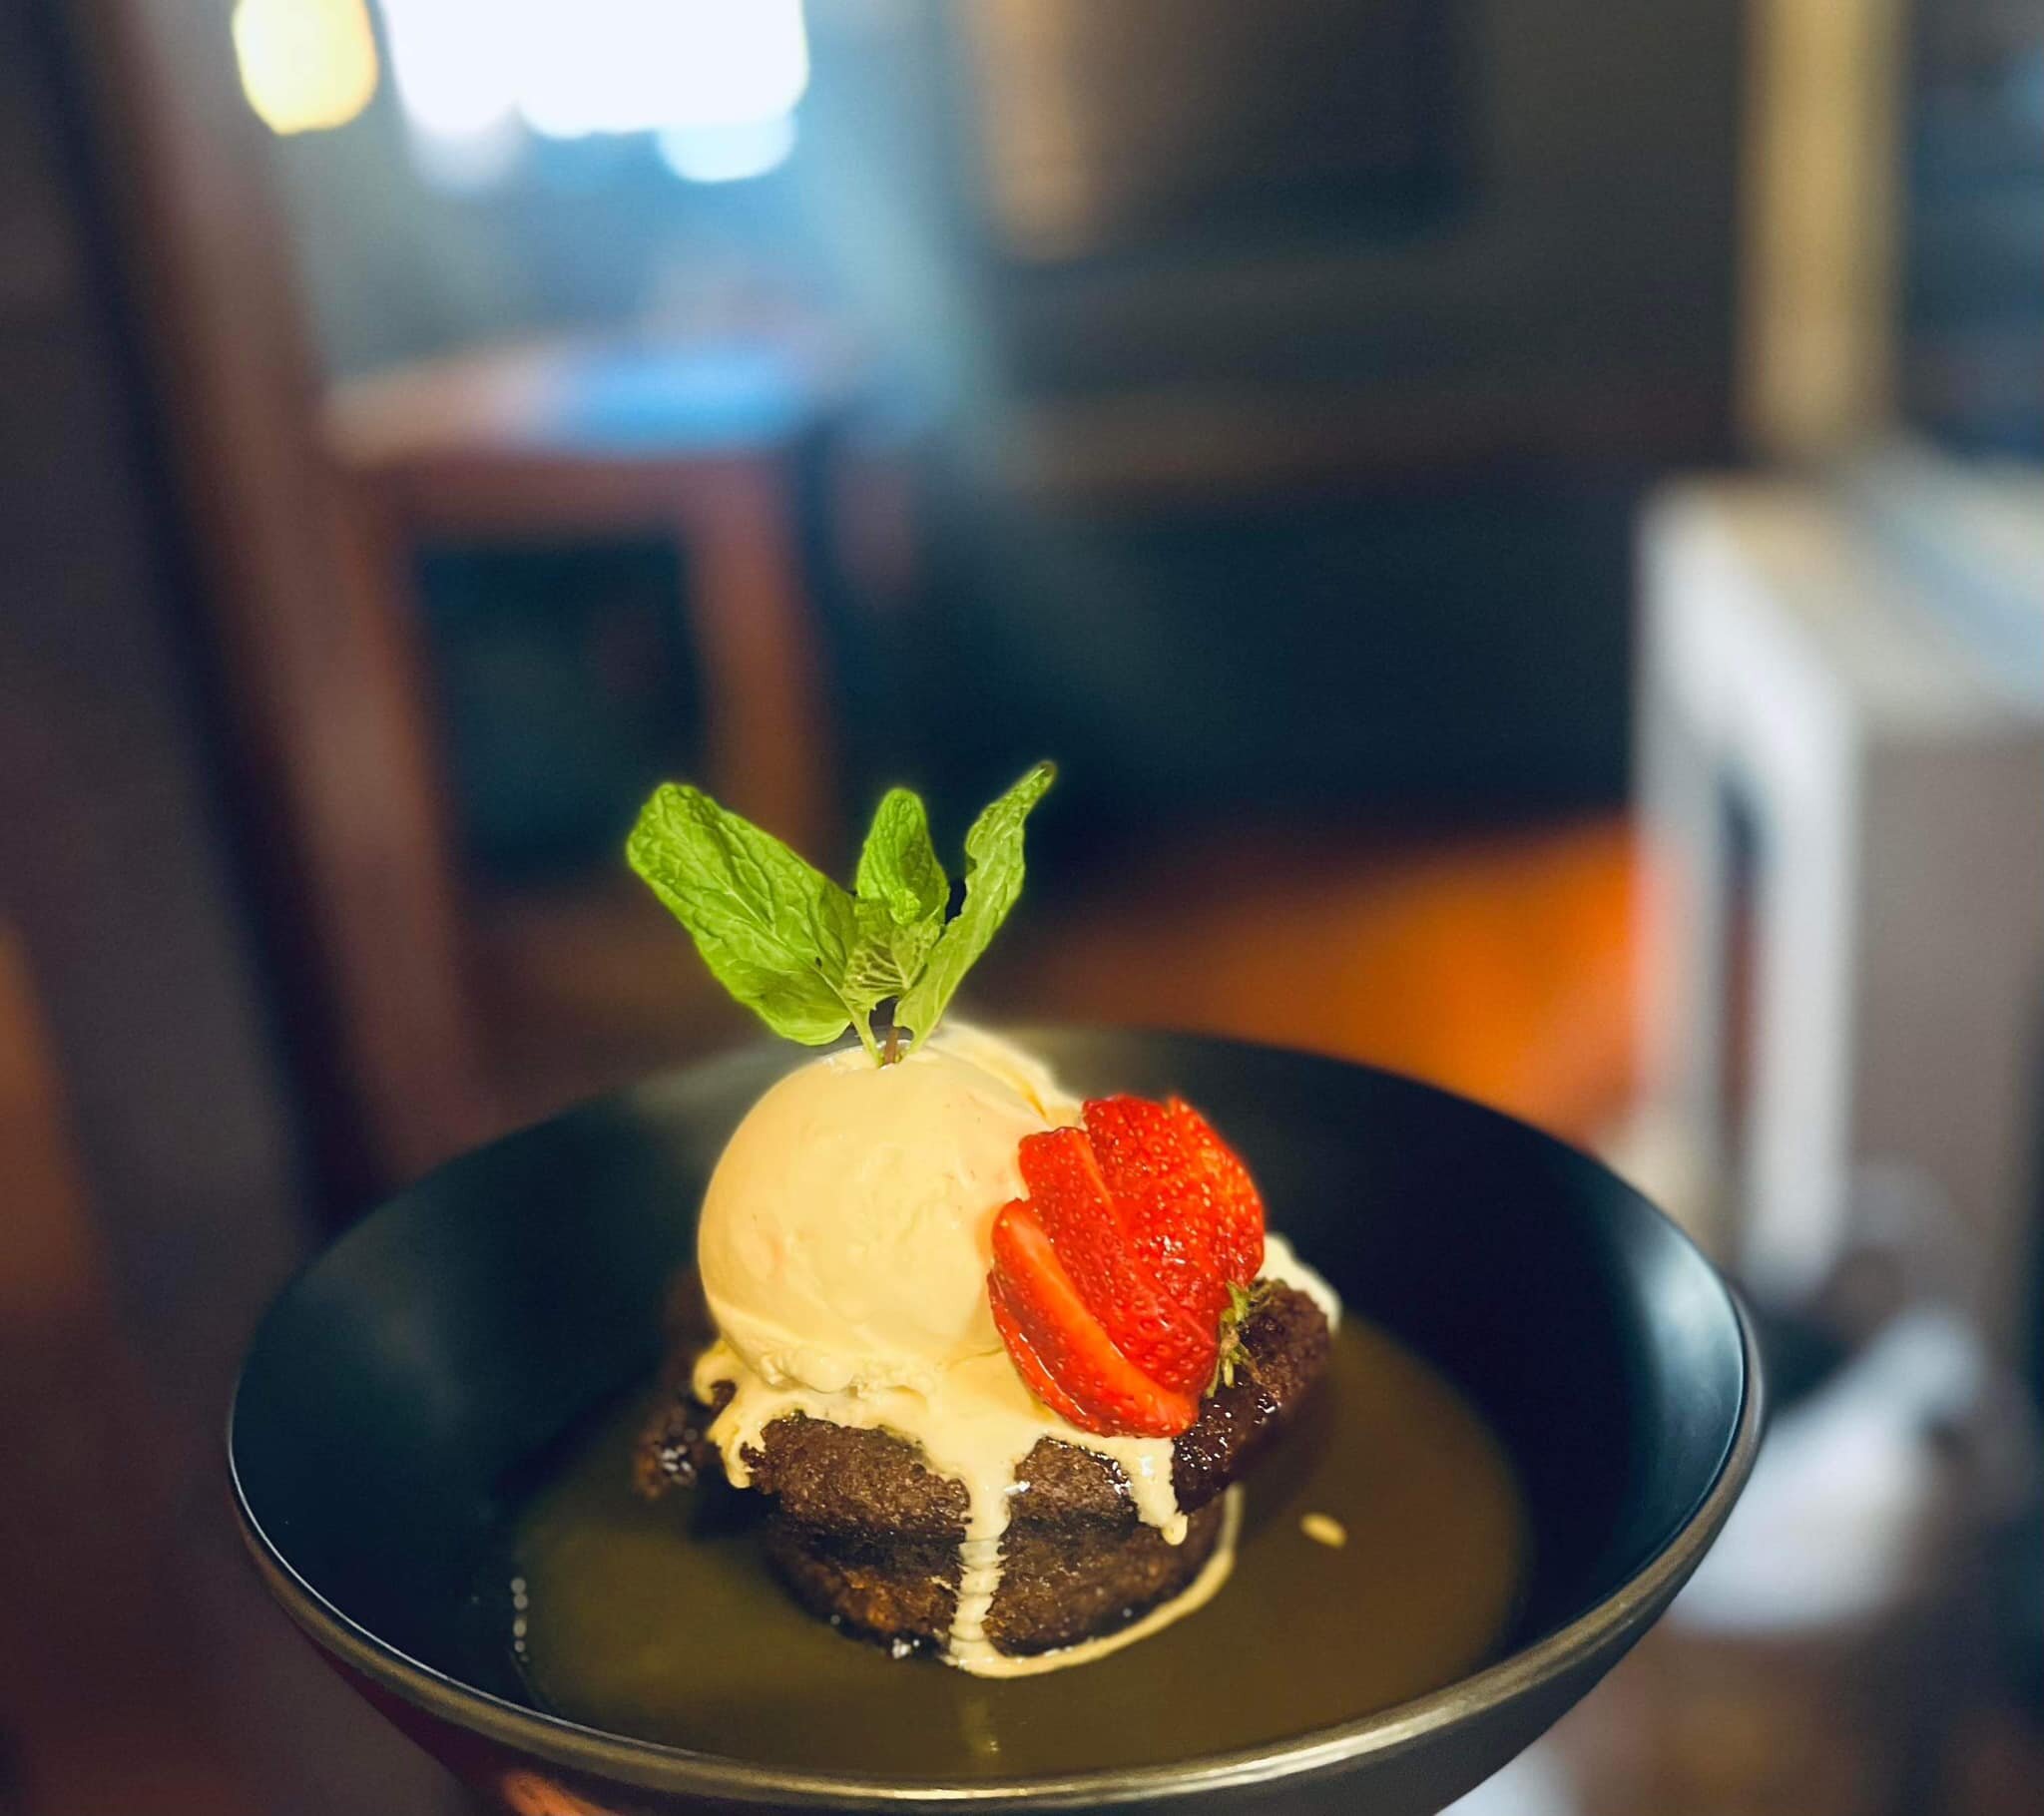 Our famous house made warm sticky toffee puddings with butterscotch sauce, vanilla bean ice cream and fresh strawberries are back for winter!